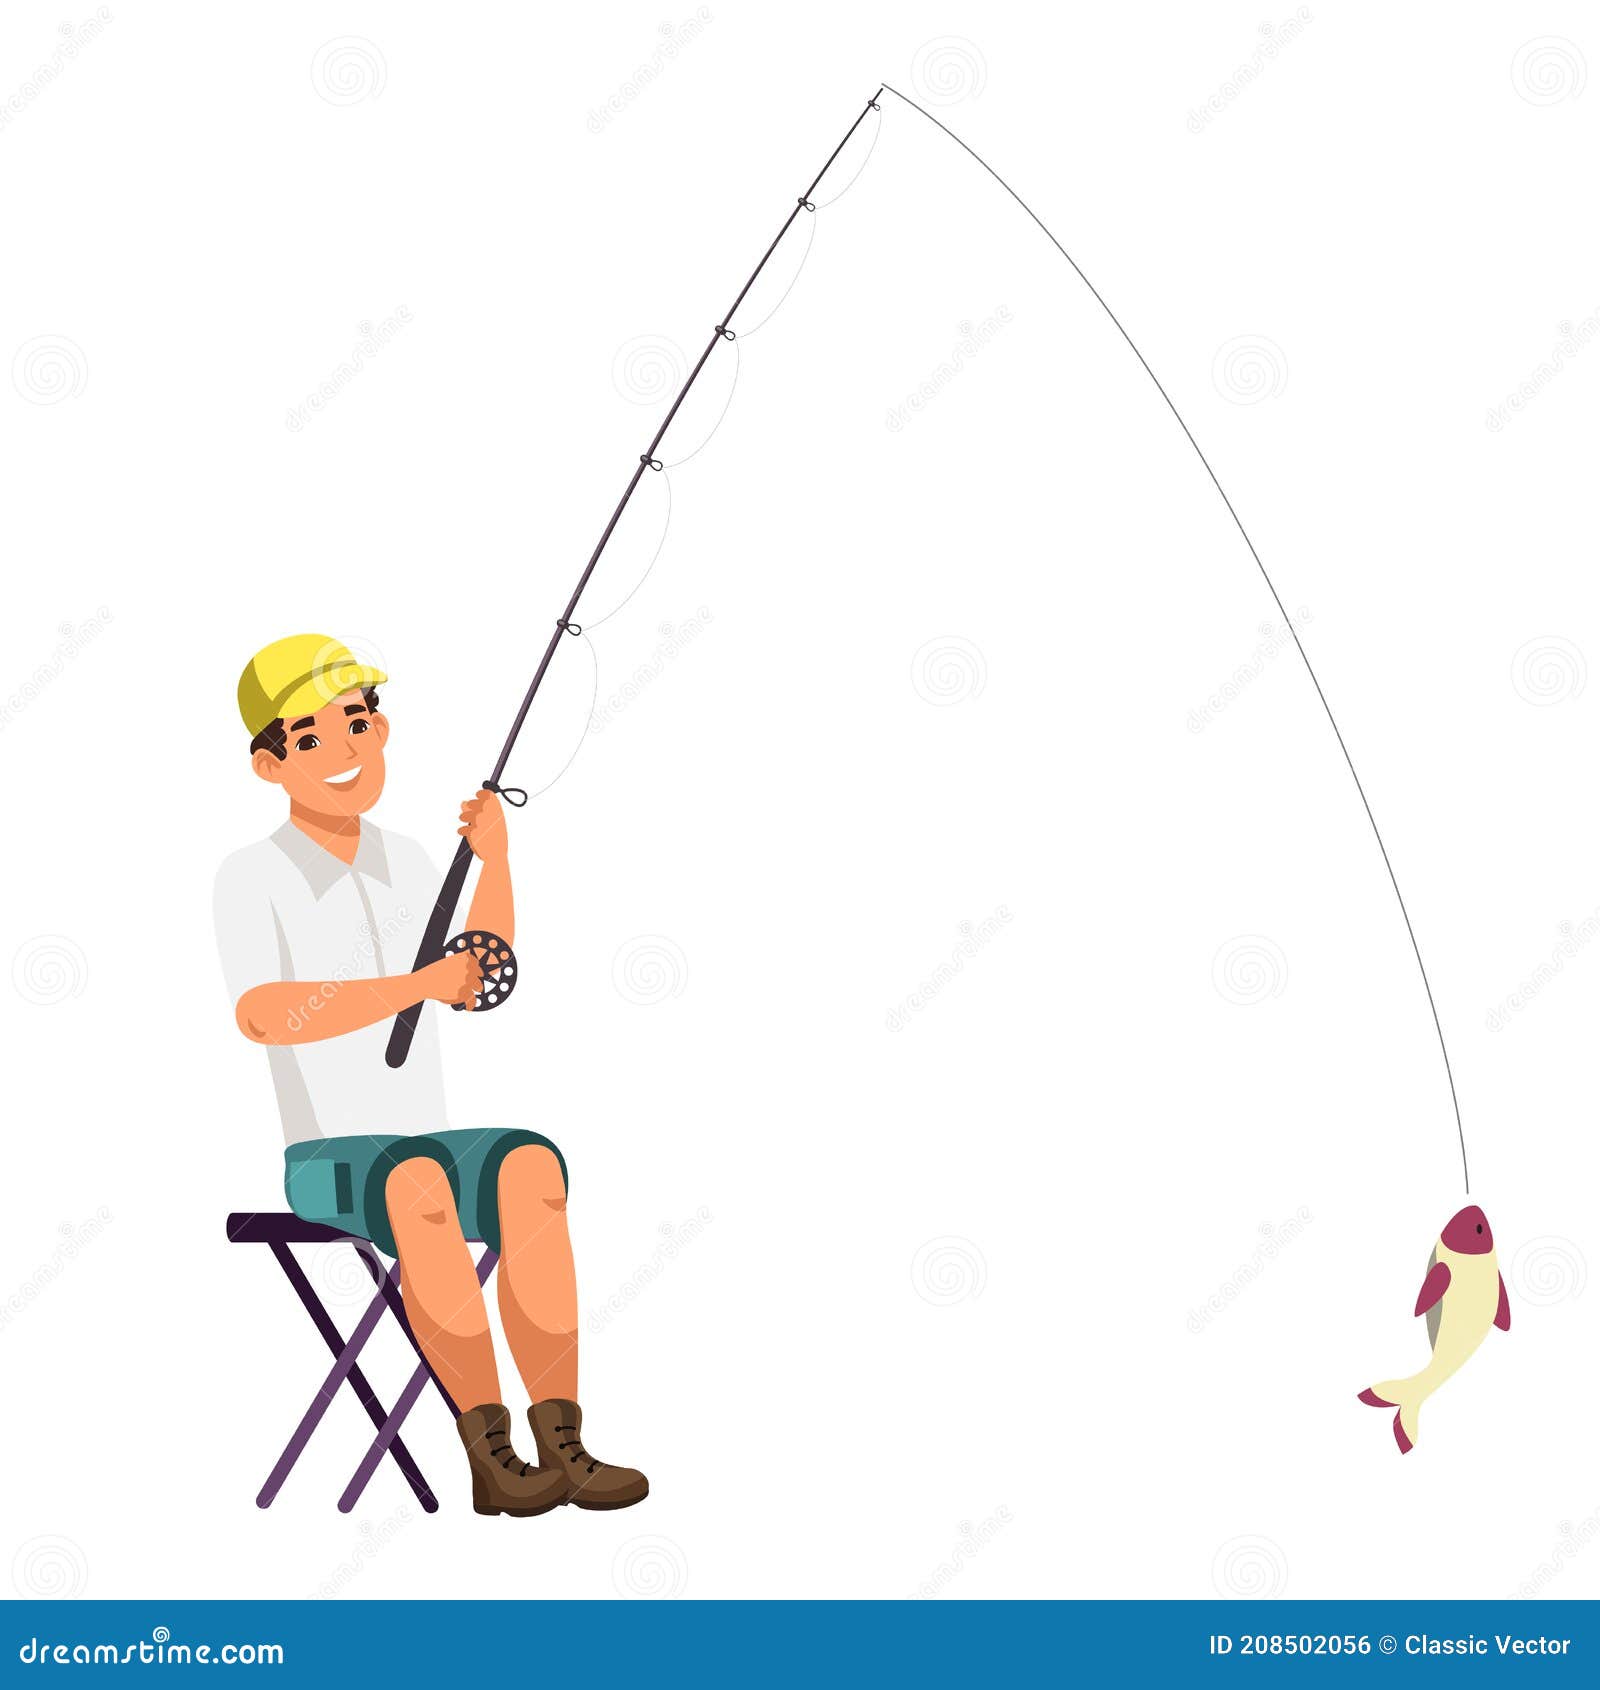 https://thumbs.dreamstime.com/z/vector-character-smiling-boy-fishing-rod-vector-characters-illustration-smiling-teenager-boy-sits-folding-chair-208502056.jpg